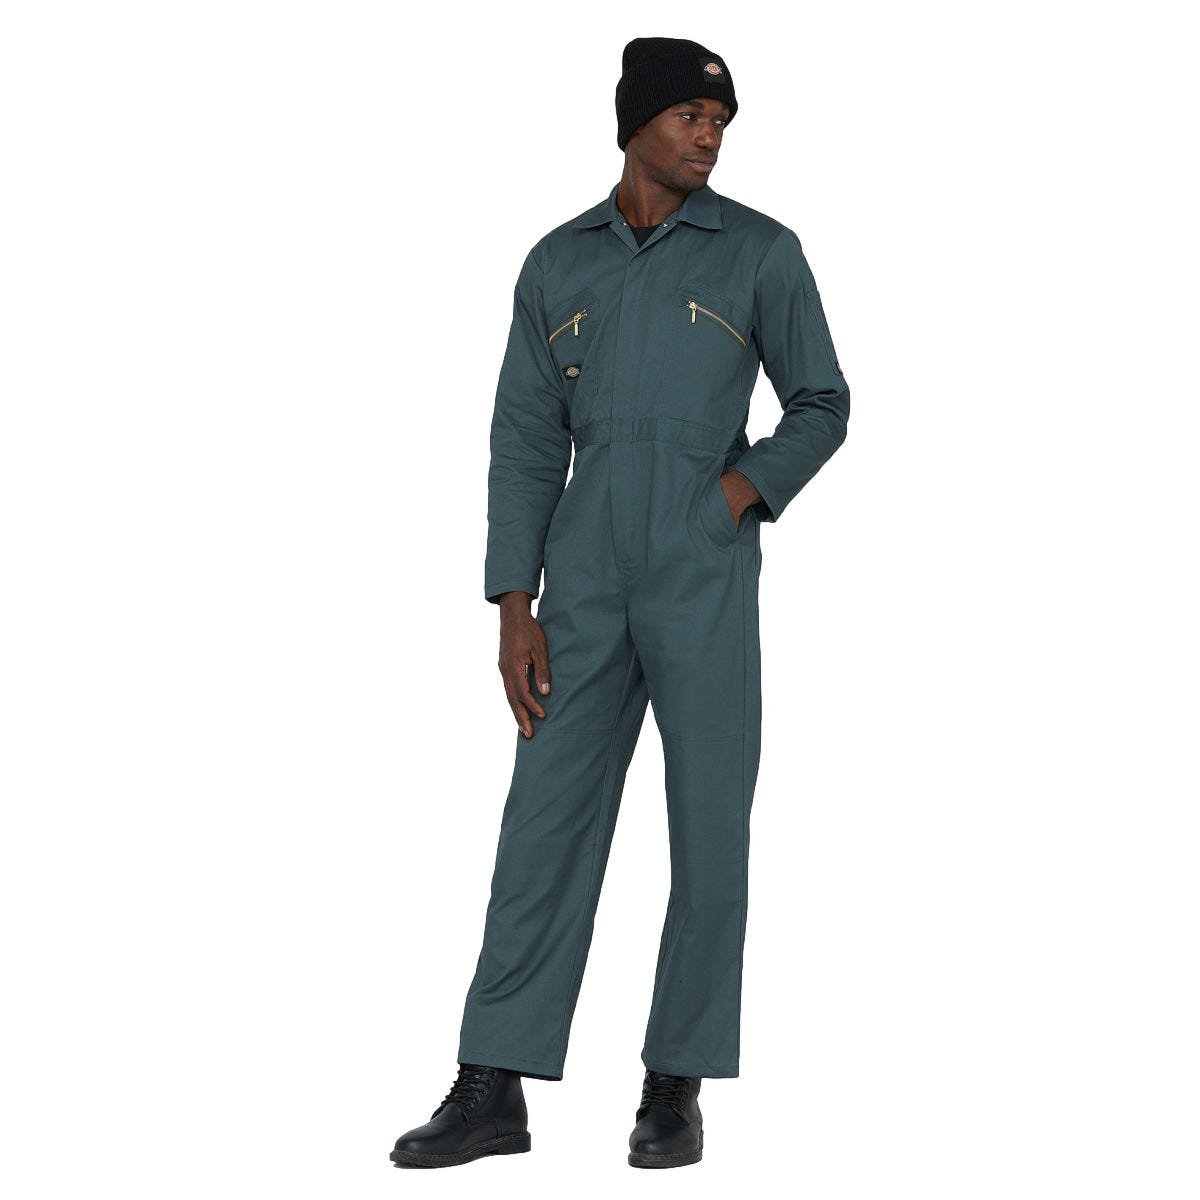 Combinaison Redhawk Coverhall Vert - Dickies - Taille L 3